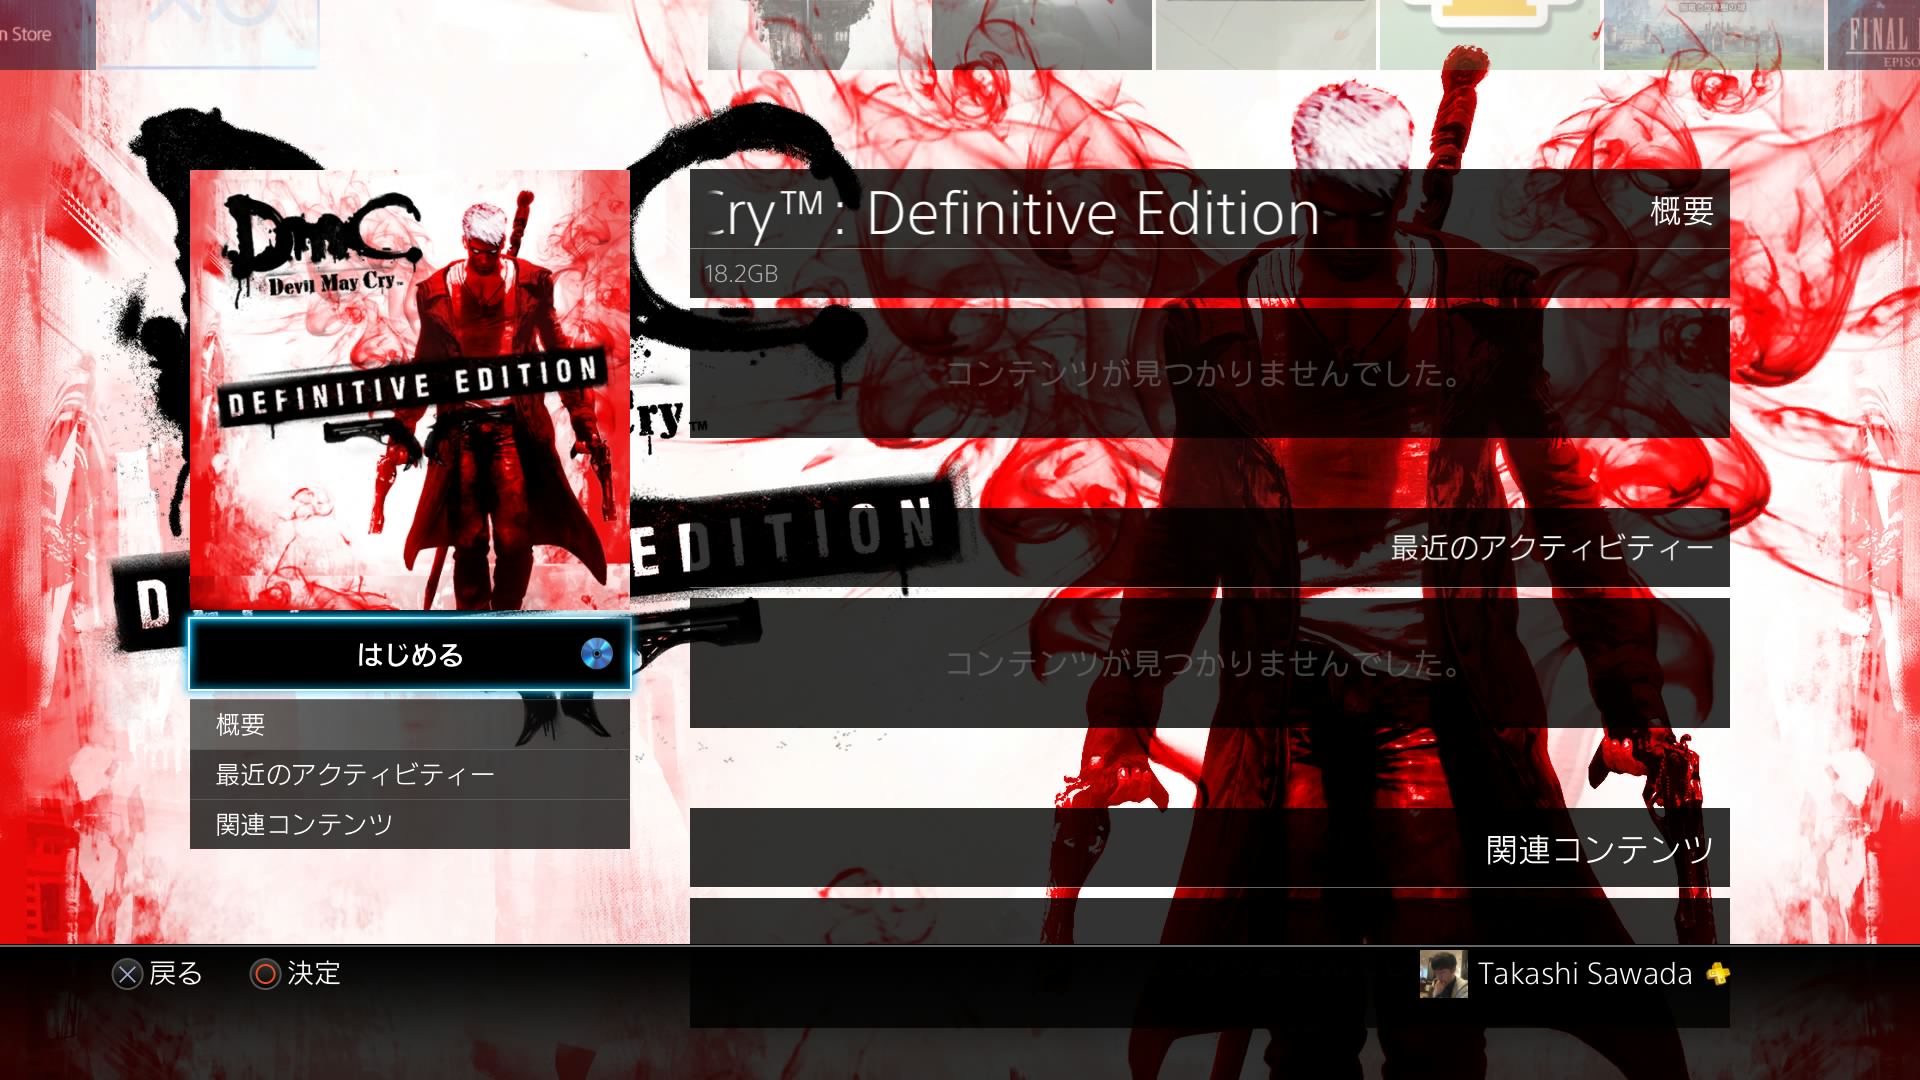 Dmc devil may cry definitive edition review 01